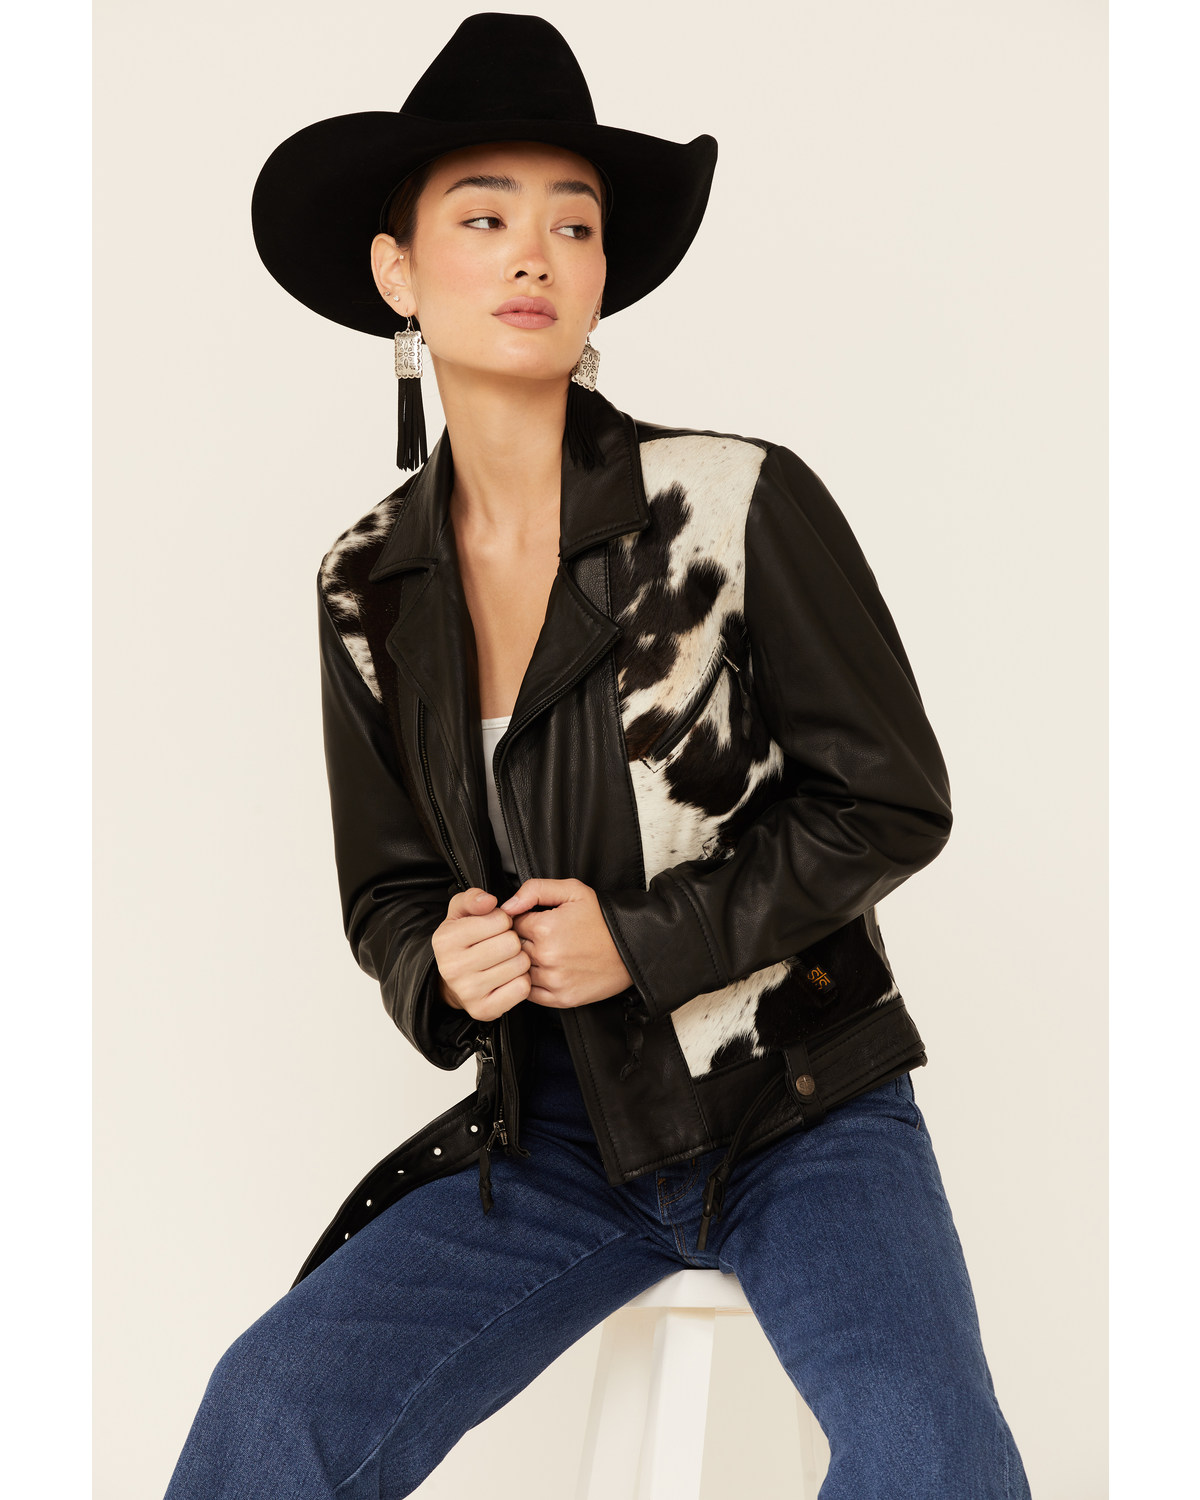 STS Ranchwear Women's Cow Print Leather Jacket